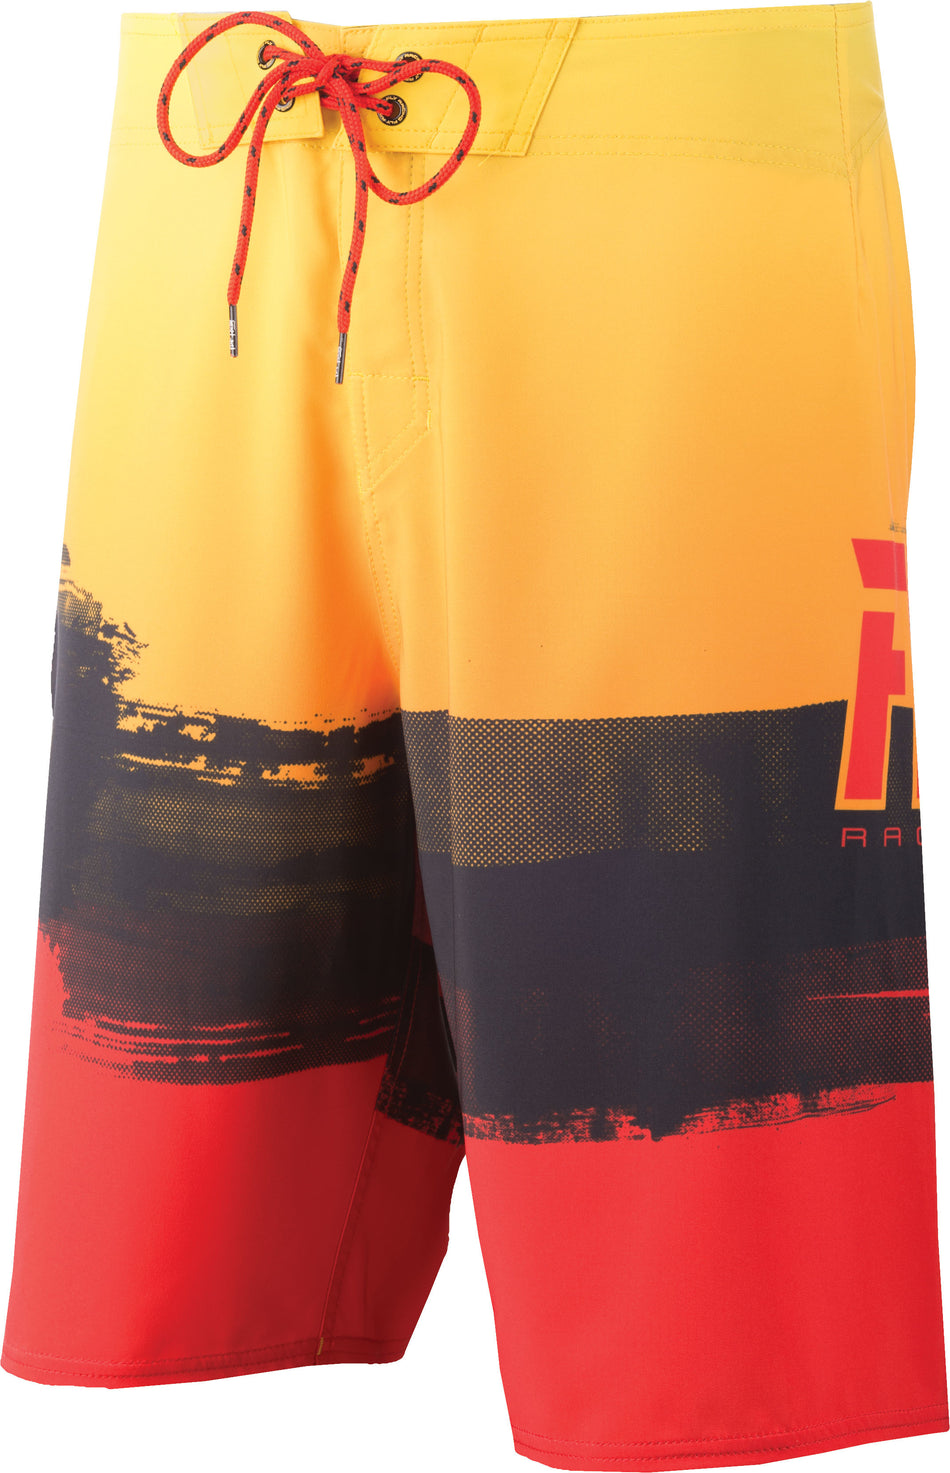 FLY RACING Fly Paint Slinger Boardshorts Red/Yellow Sz 36 353-19436